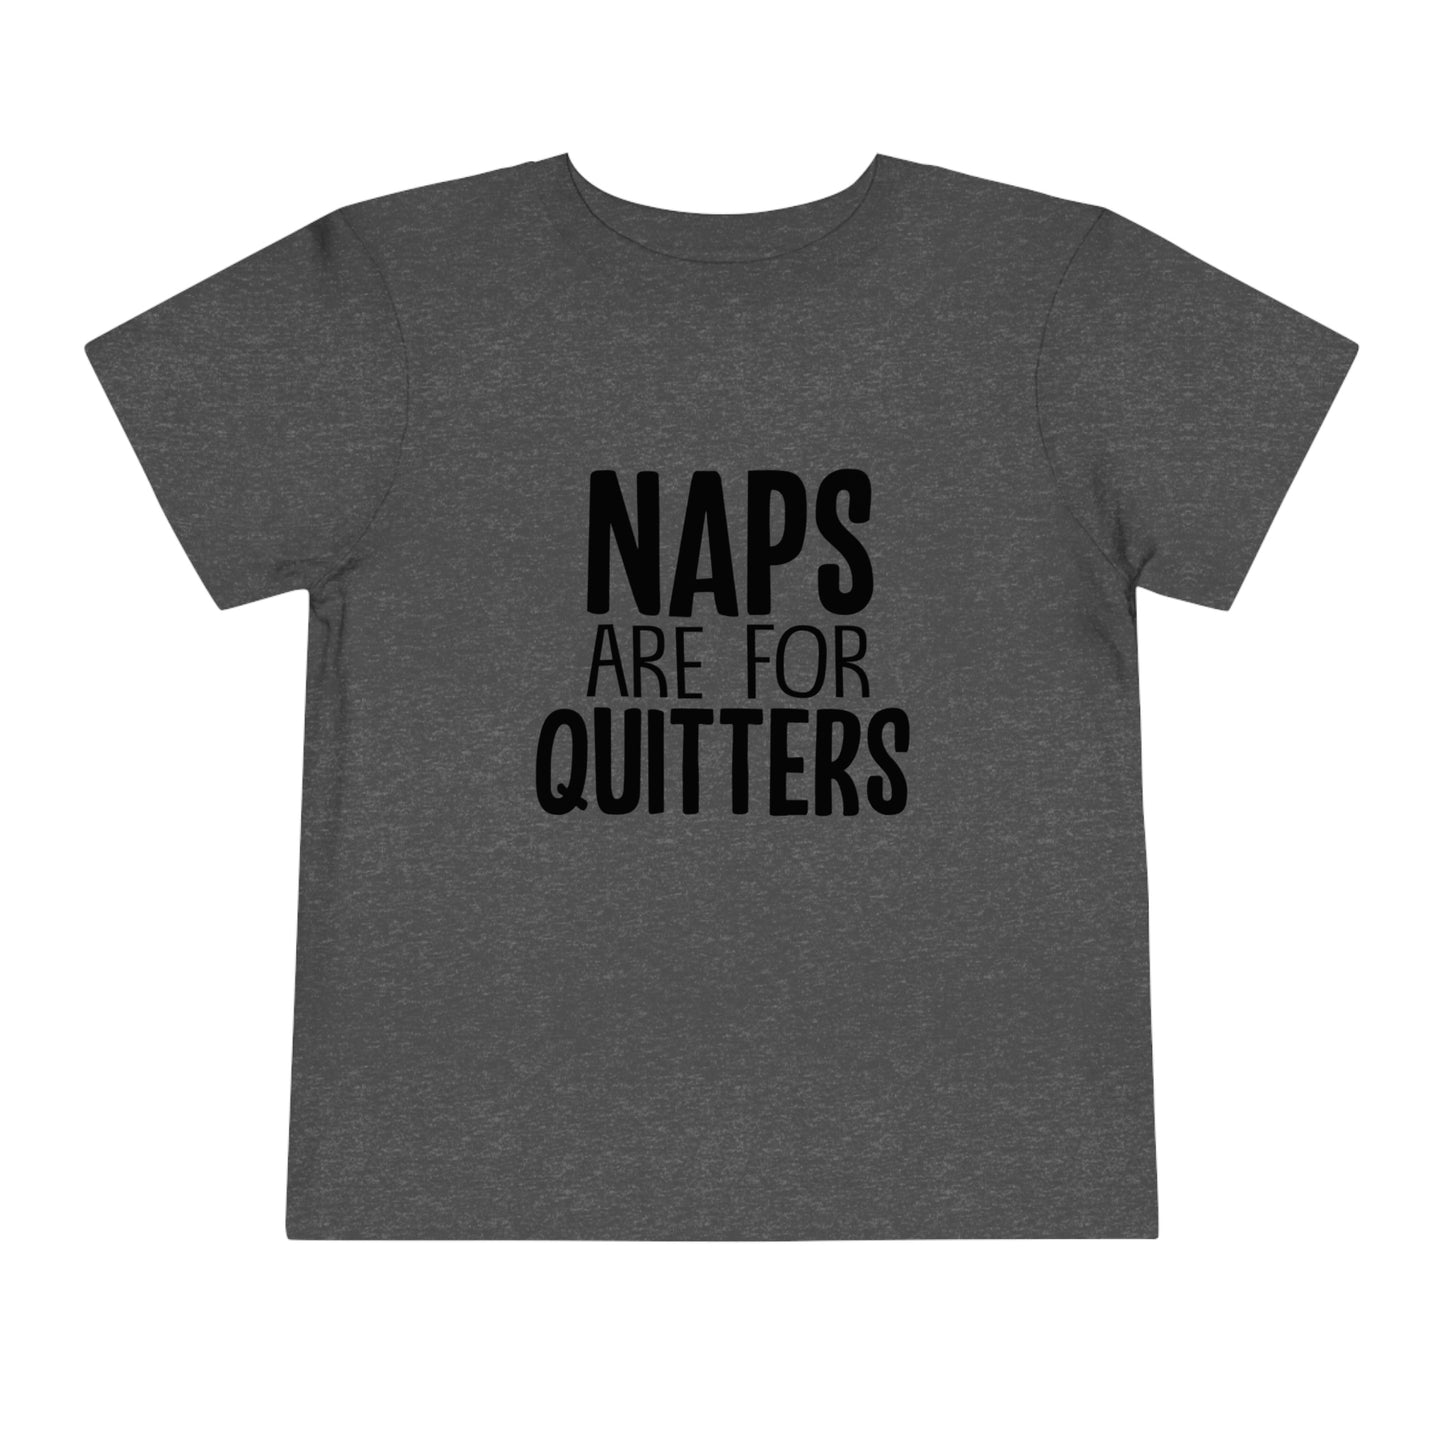 "Naps Are For Quitters" Toddler Short Sleeve Tee (2T-5T)